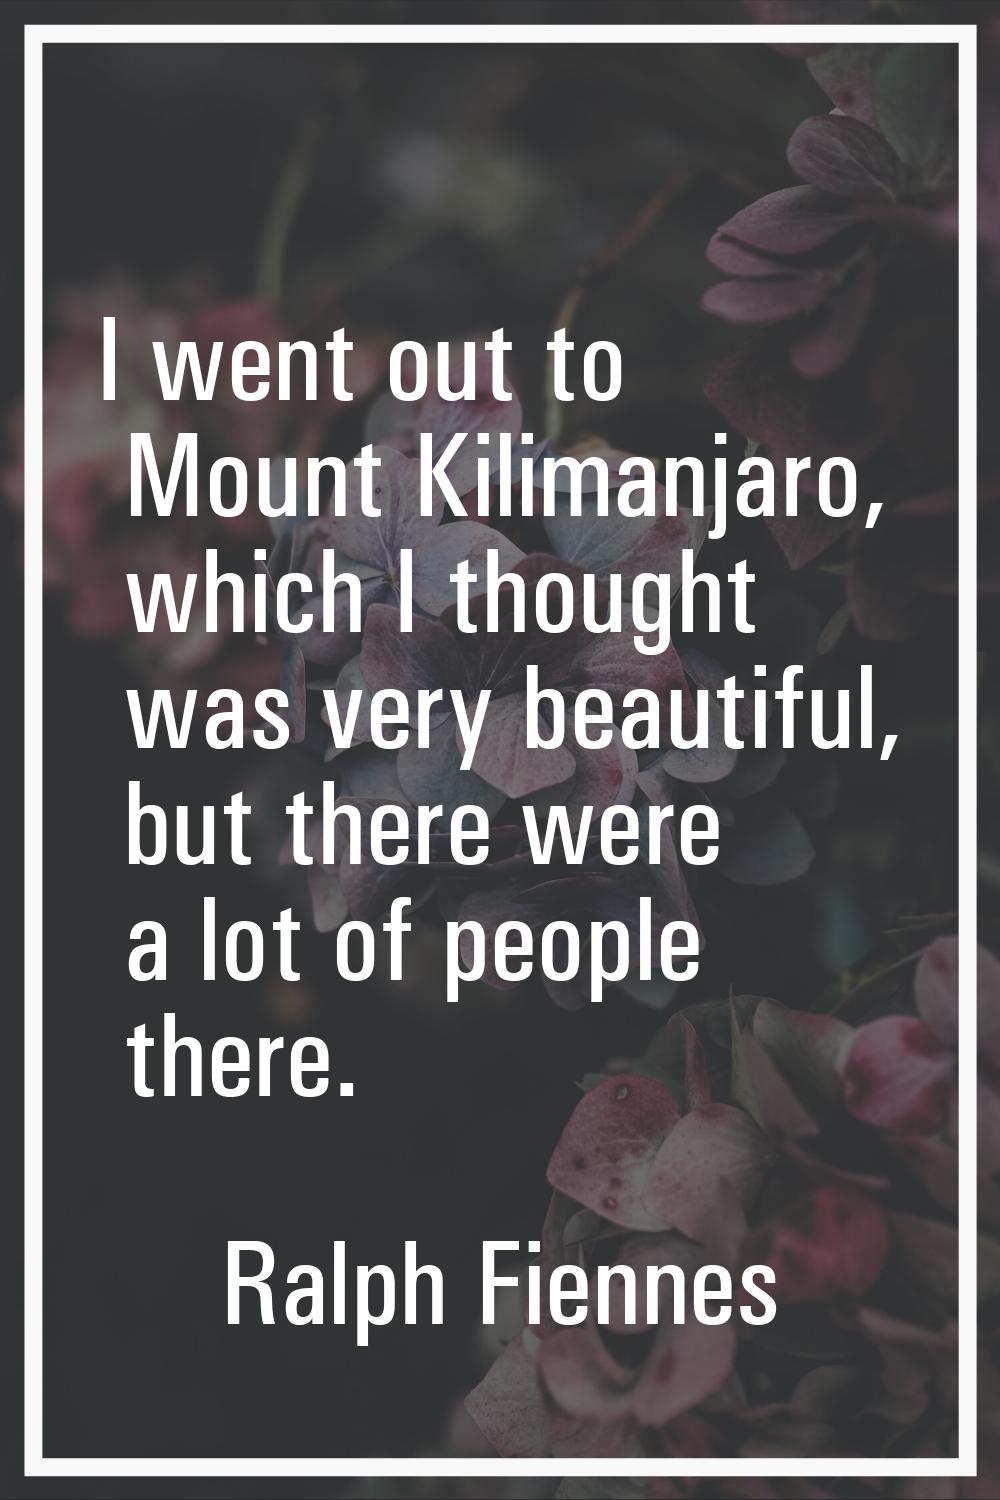 I went out to Mount Kilimanjaro, which I thought was very beautiful, but there were a lot of people